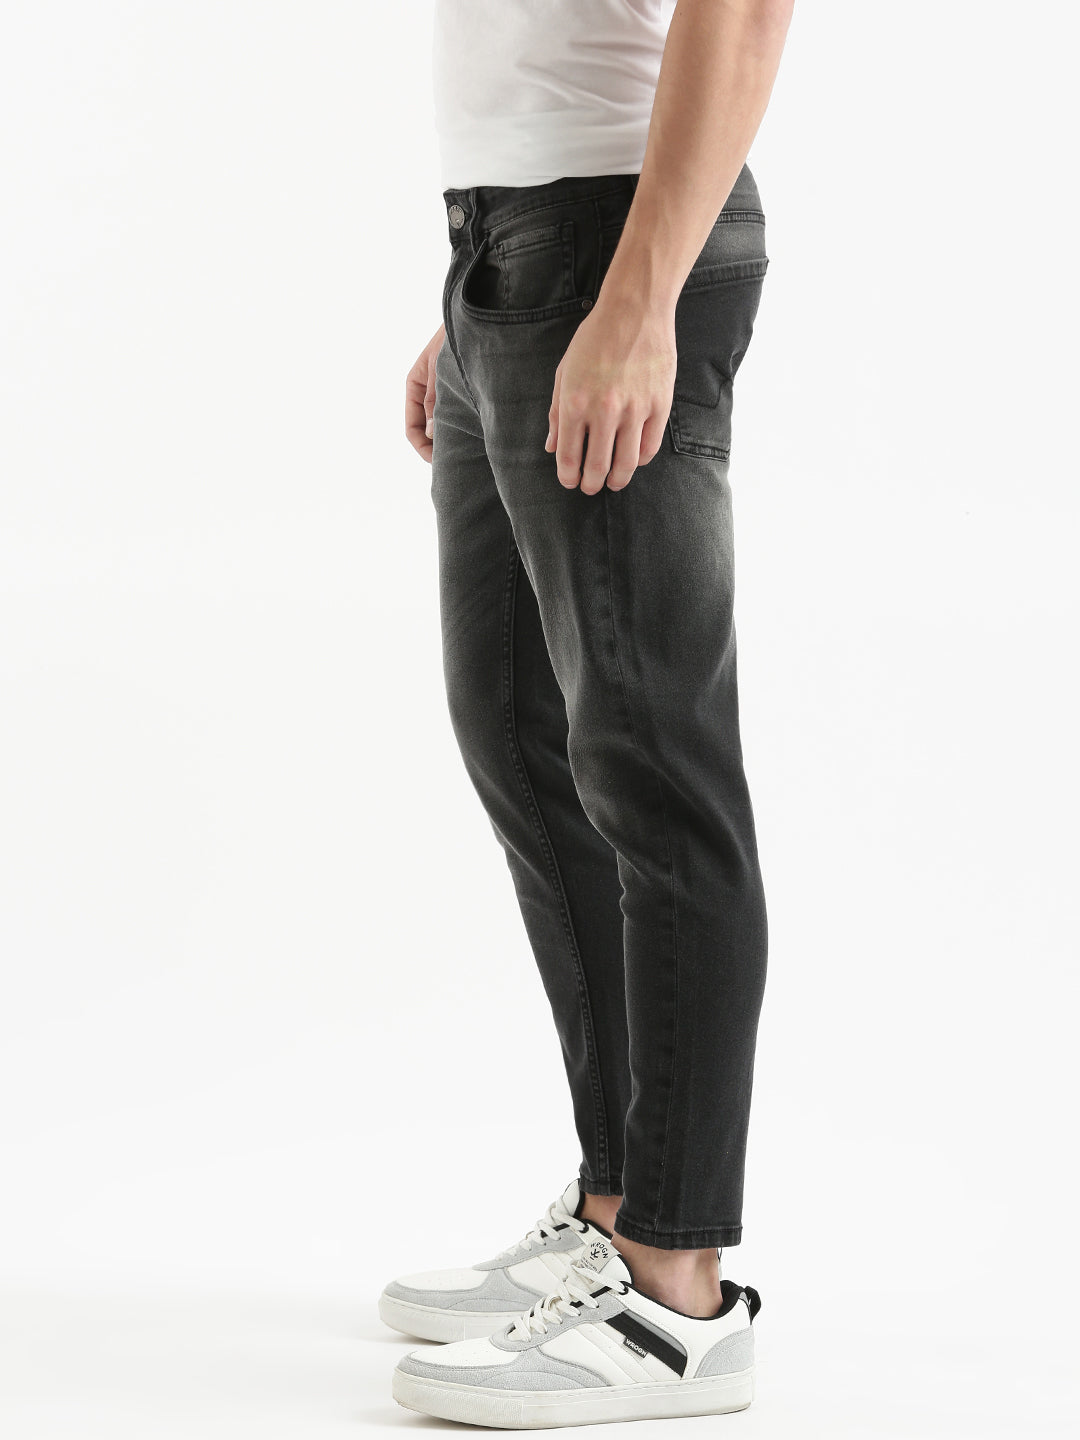 Graphite Grey Faded Jeans